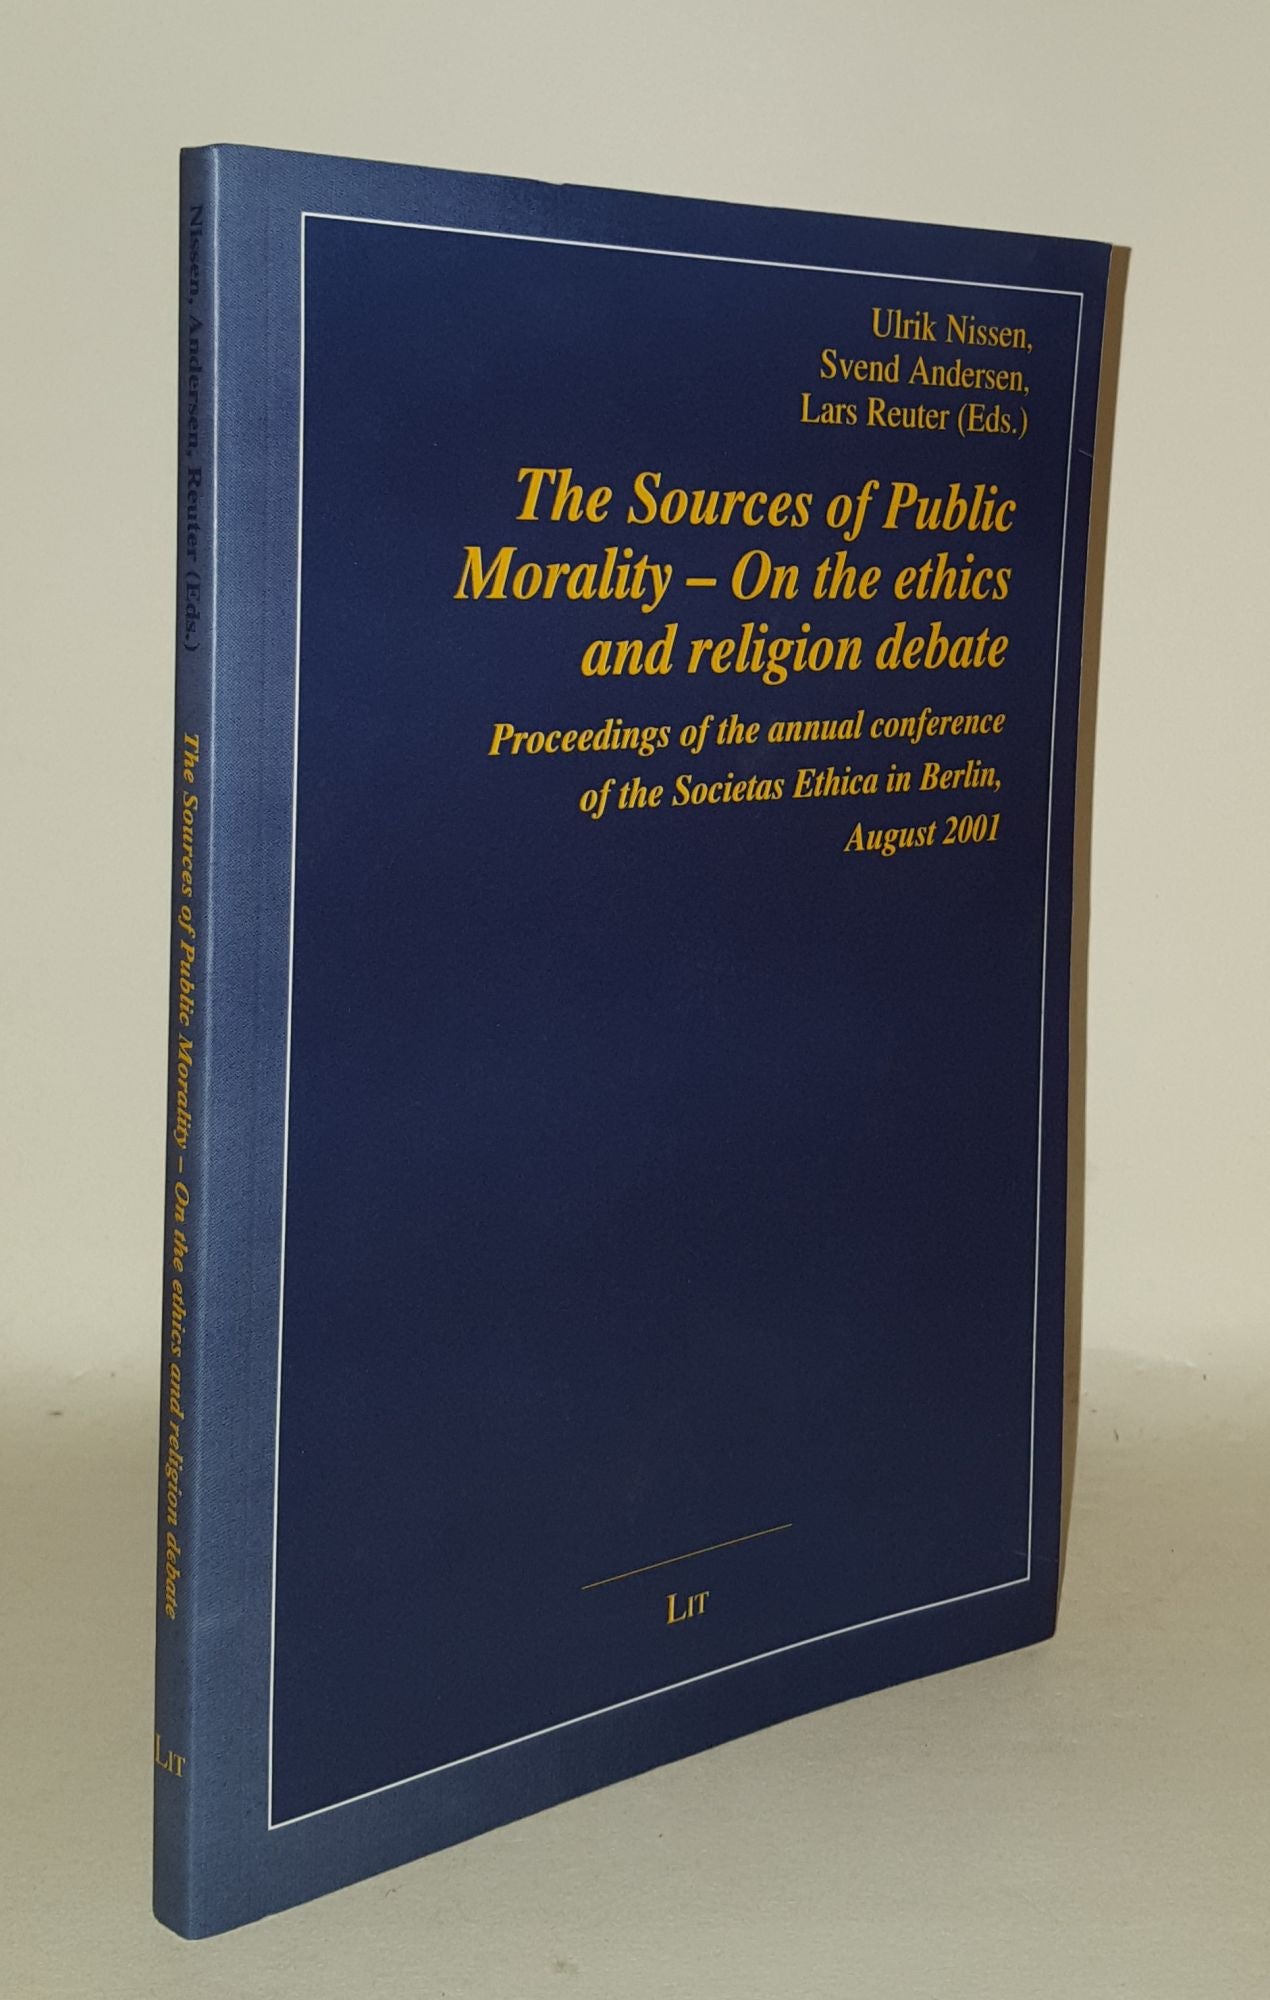 NISSEN Ulrik - The Sources of Public Morality on the Ethics and Religion Debate Proceedings of the Annual Conference of the Societas Ethica in Berlin August 2001